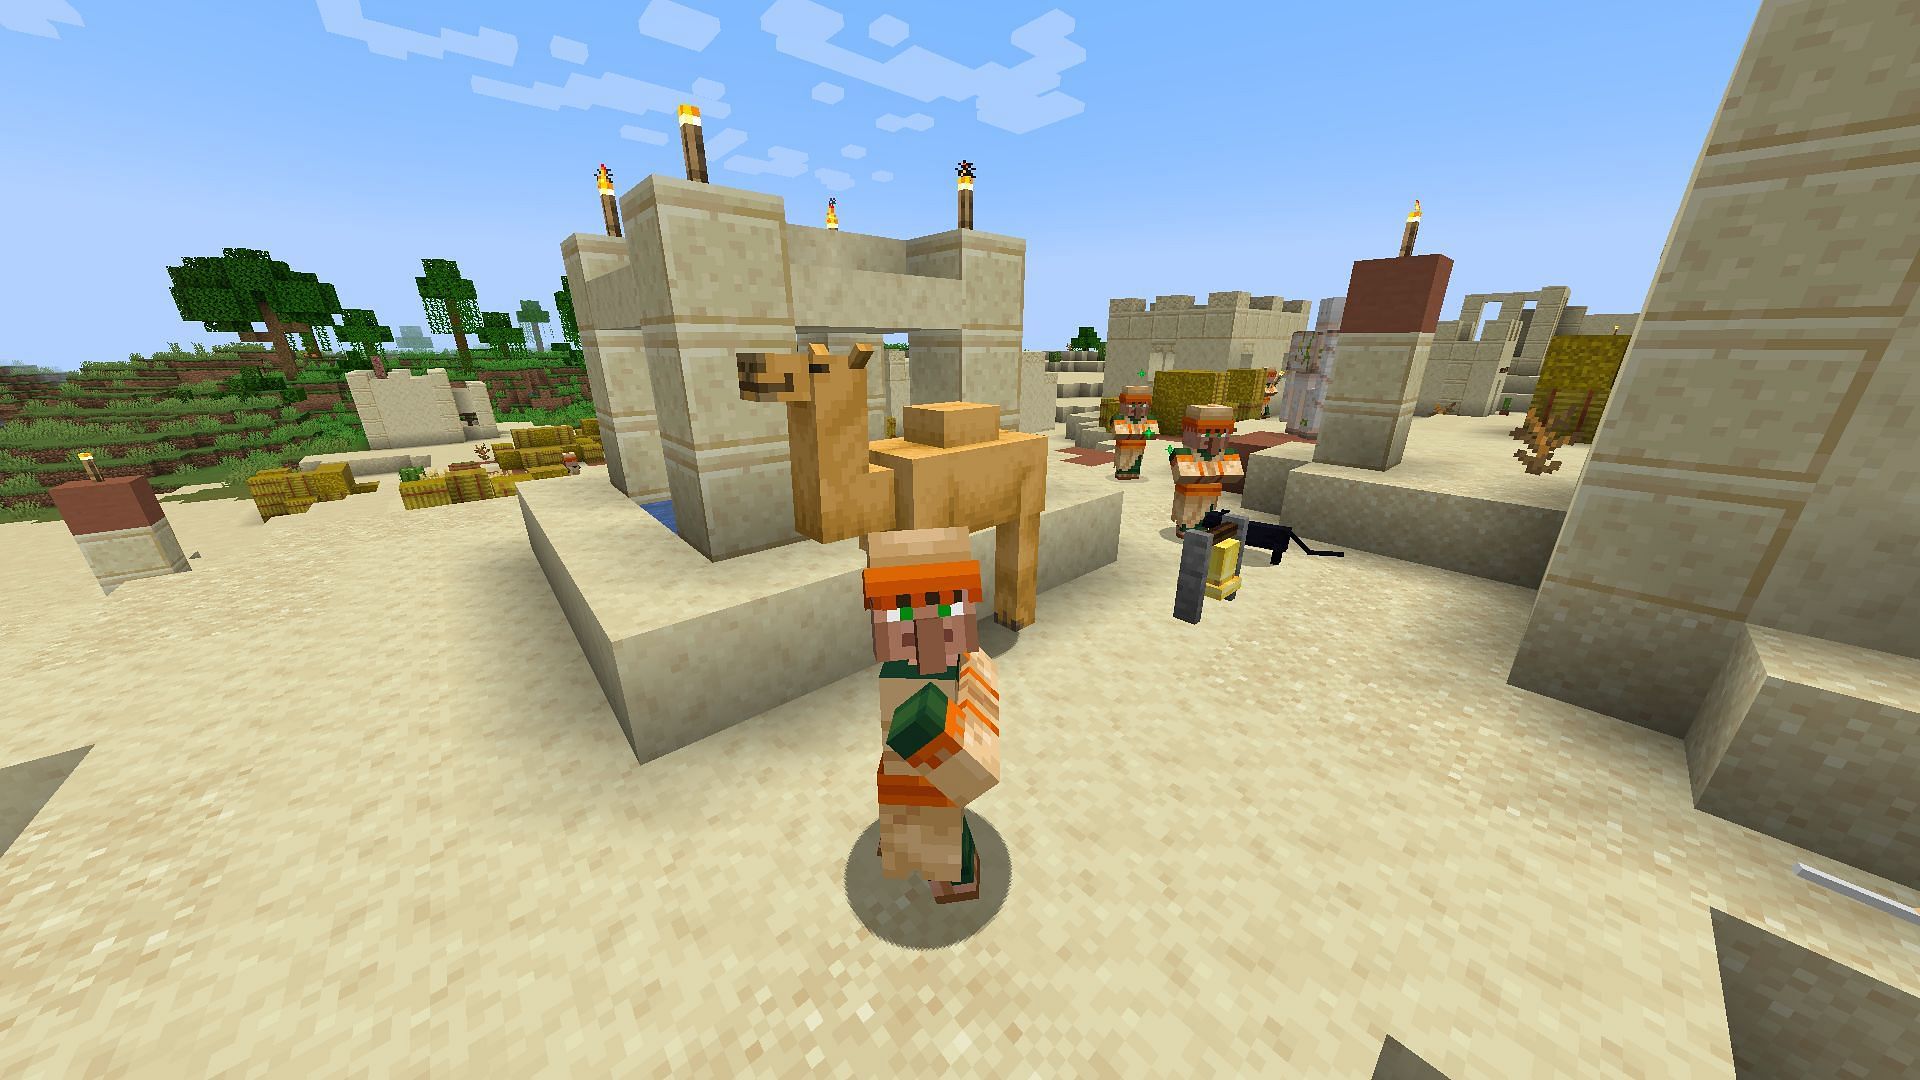 Camels can be found in desert villages in Minecraft Preview 1.19.50.21 (Image via Mojang)